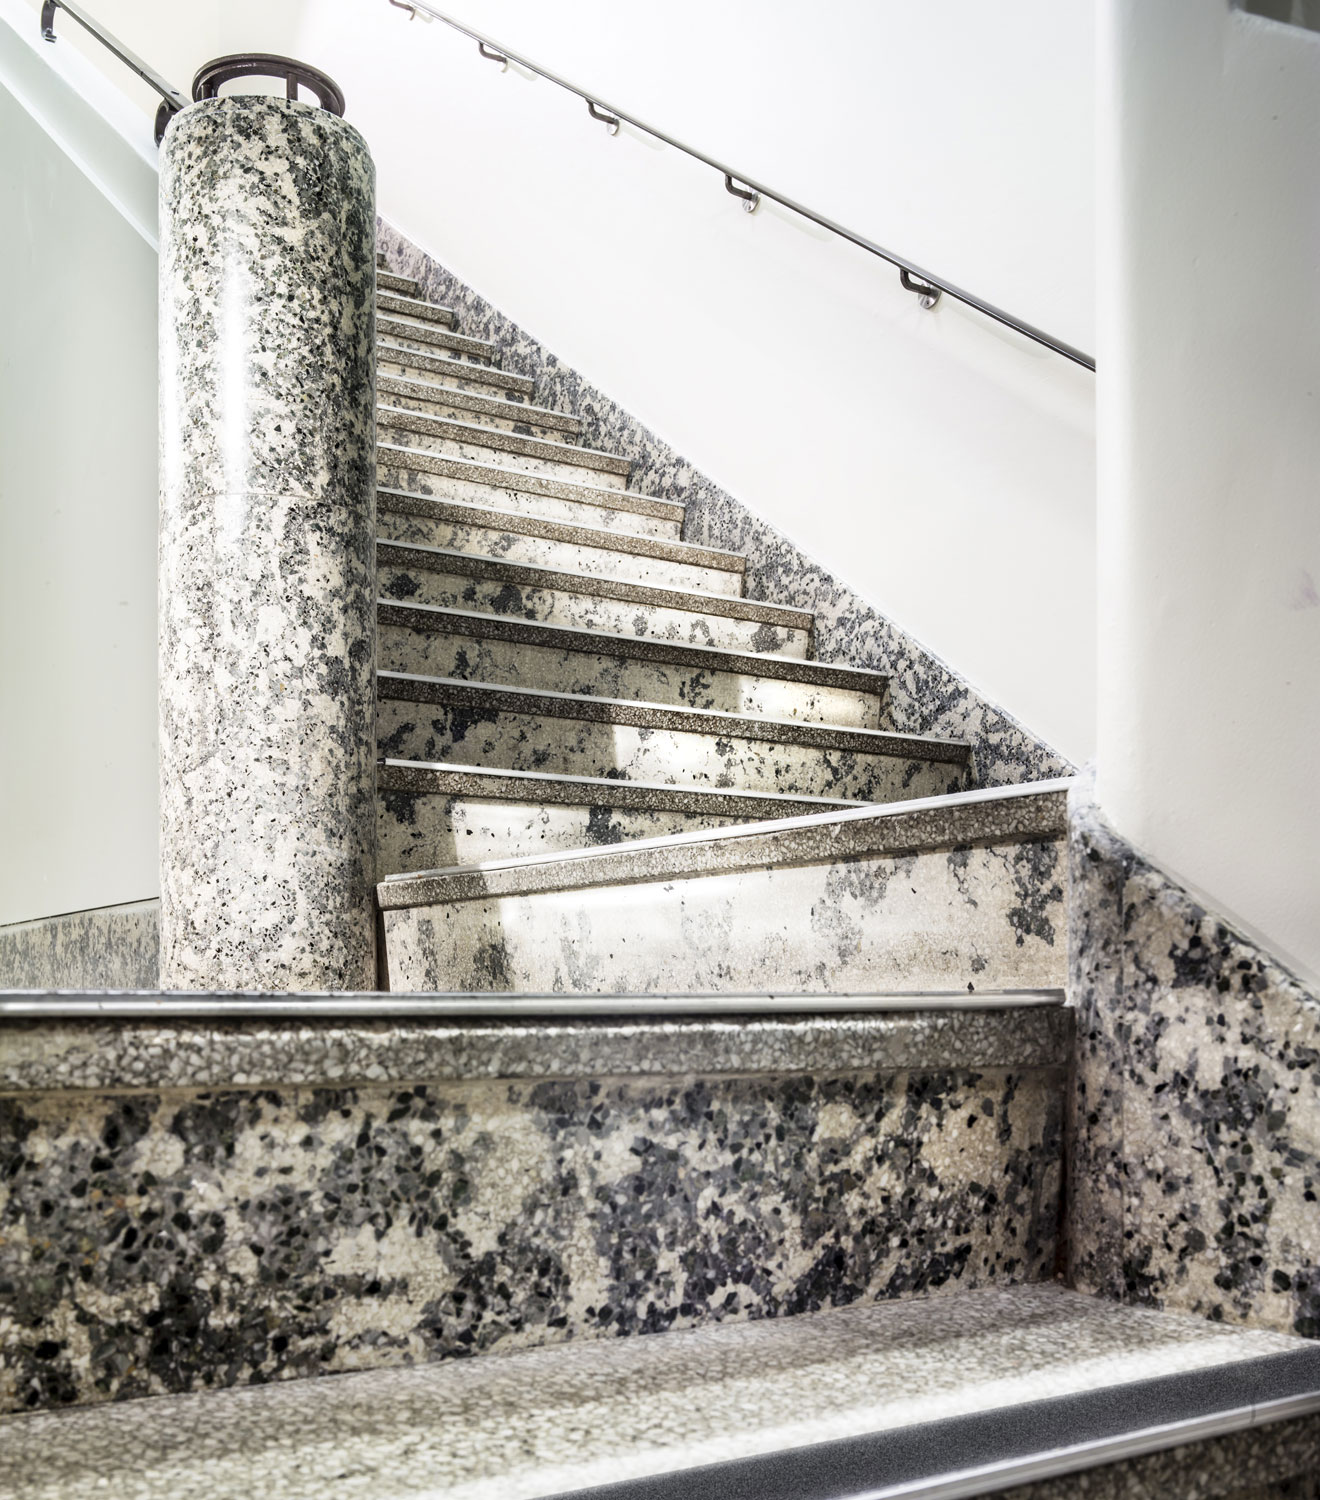 The many architectural details restored by the Church of Scientology include the historic terrazzo stairway and columns which extend three stories of the New South Wales heritage site.